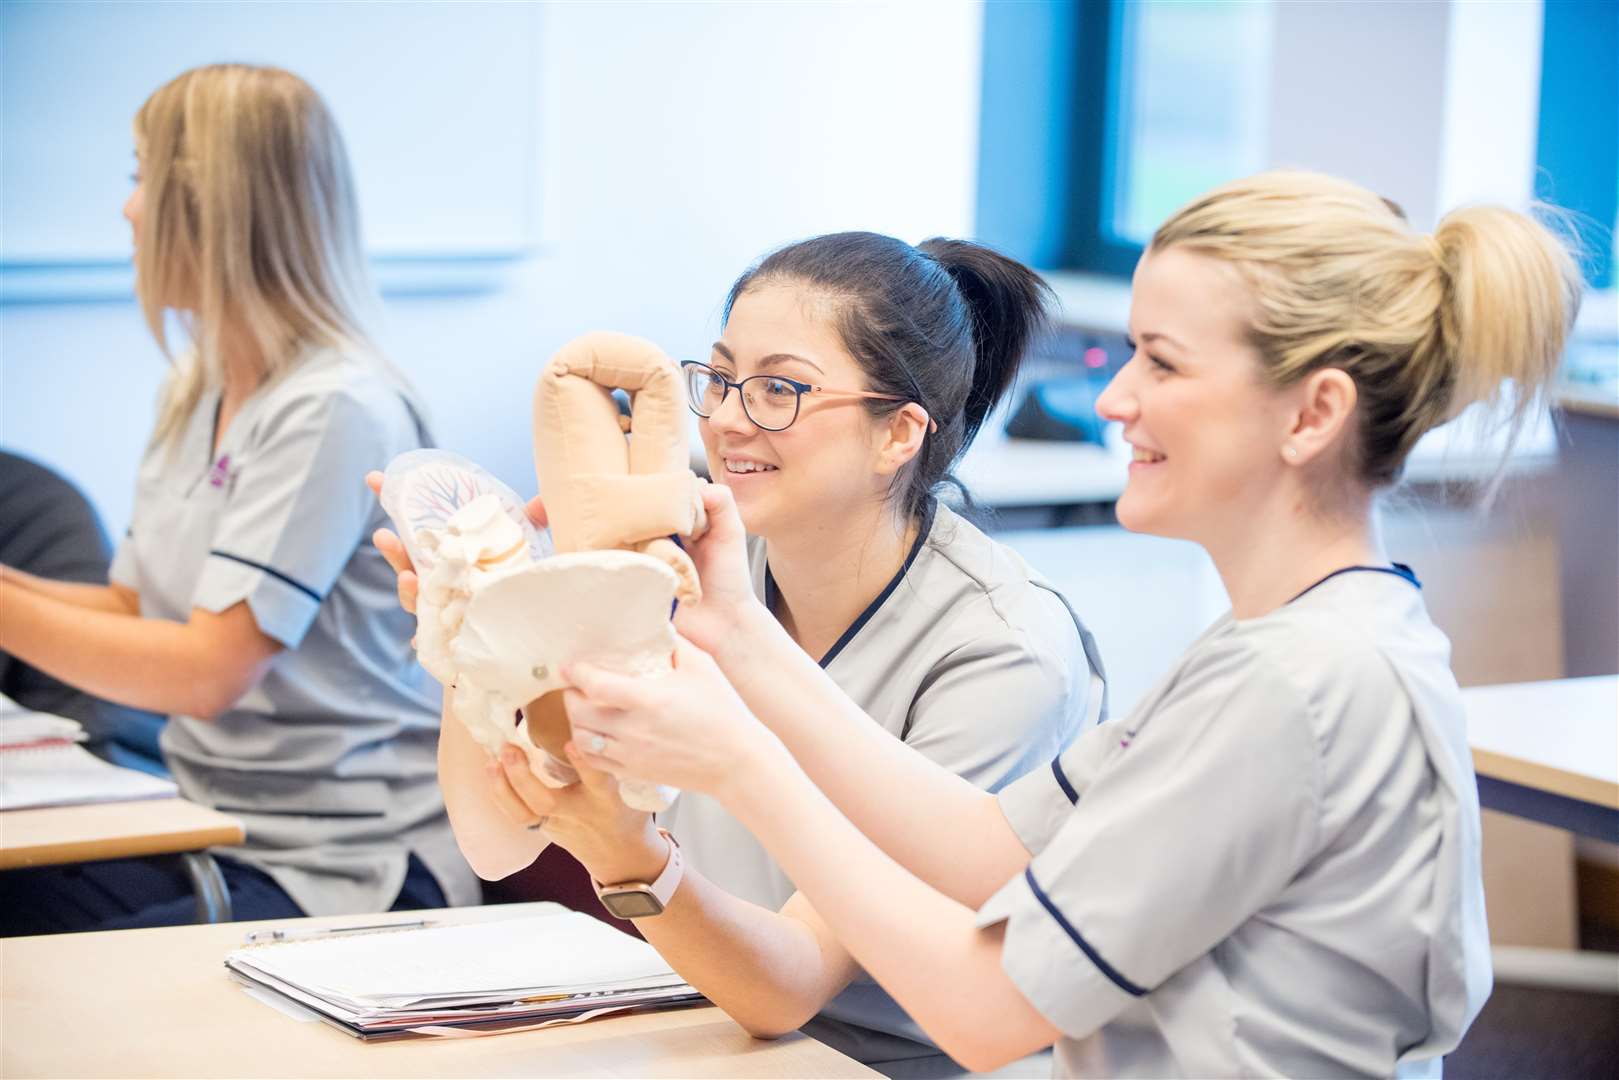 The University of the Highlands and Islands' shortened midwifery programme began in January last year to help meet the needs of communities across the north.